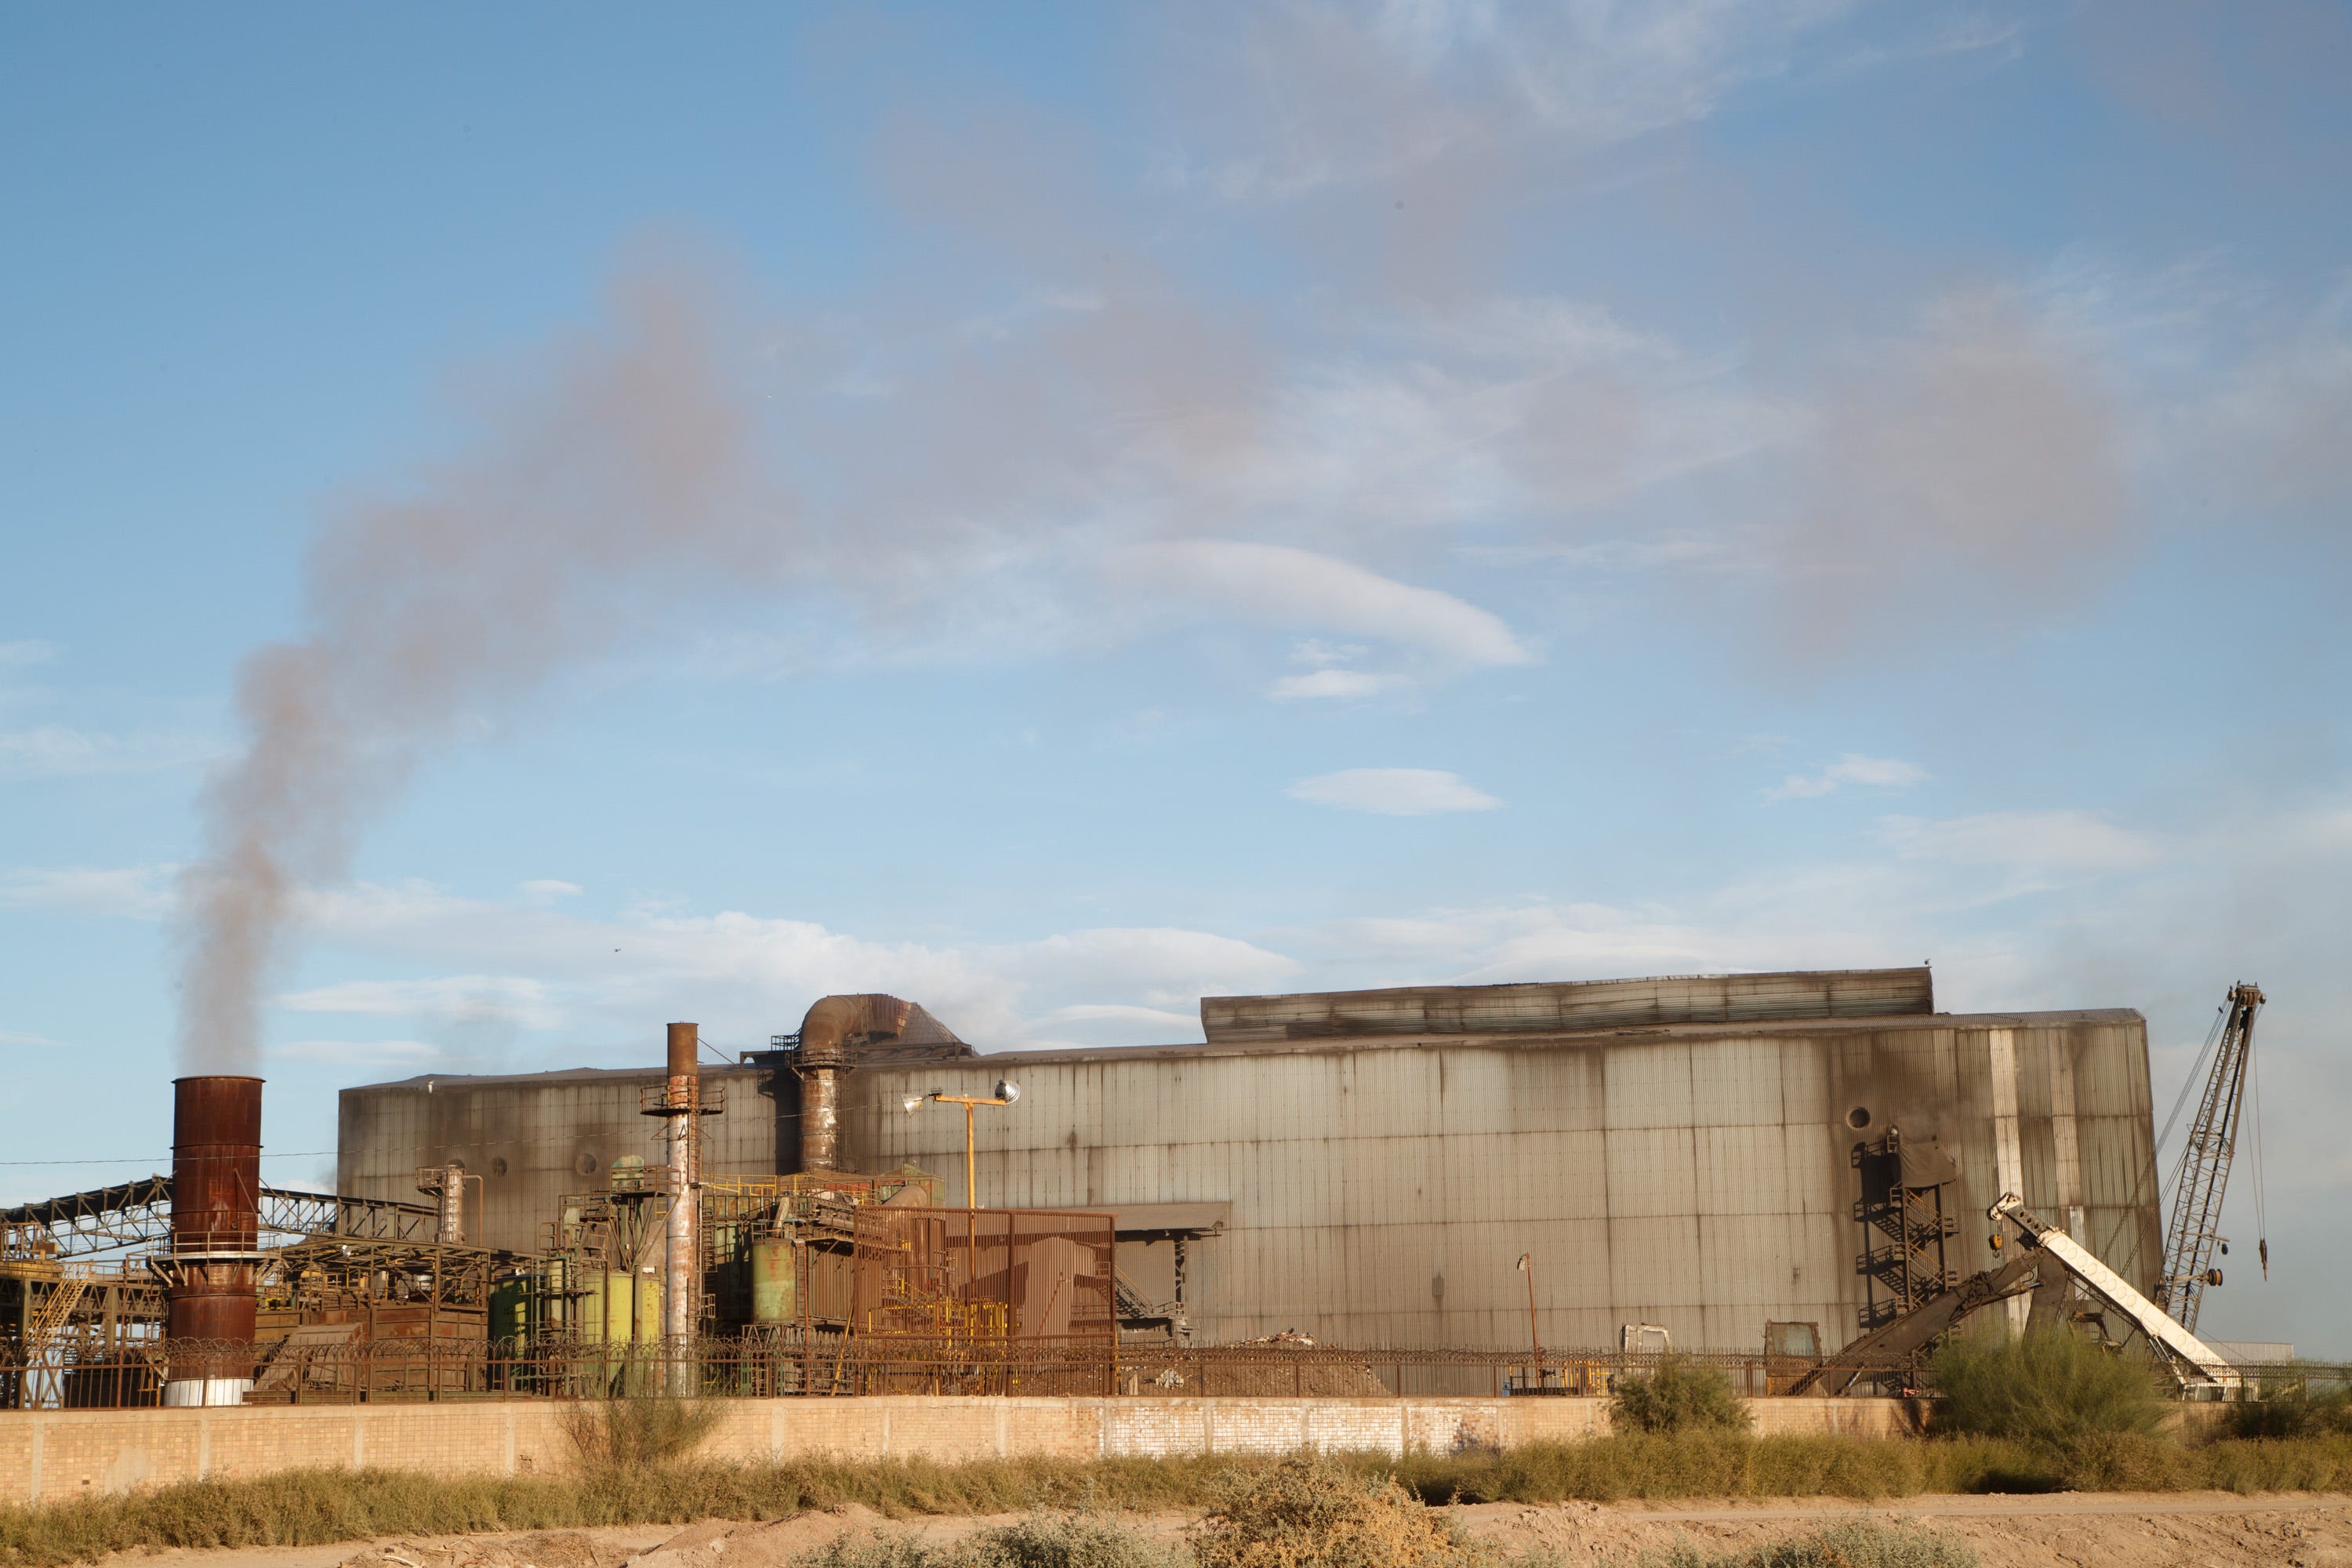 Smoke floats into the air at the Grupo Simec steel mill, which is flanked by several homes and farmland south of Mexicali.